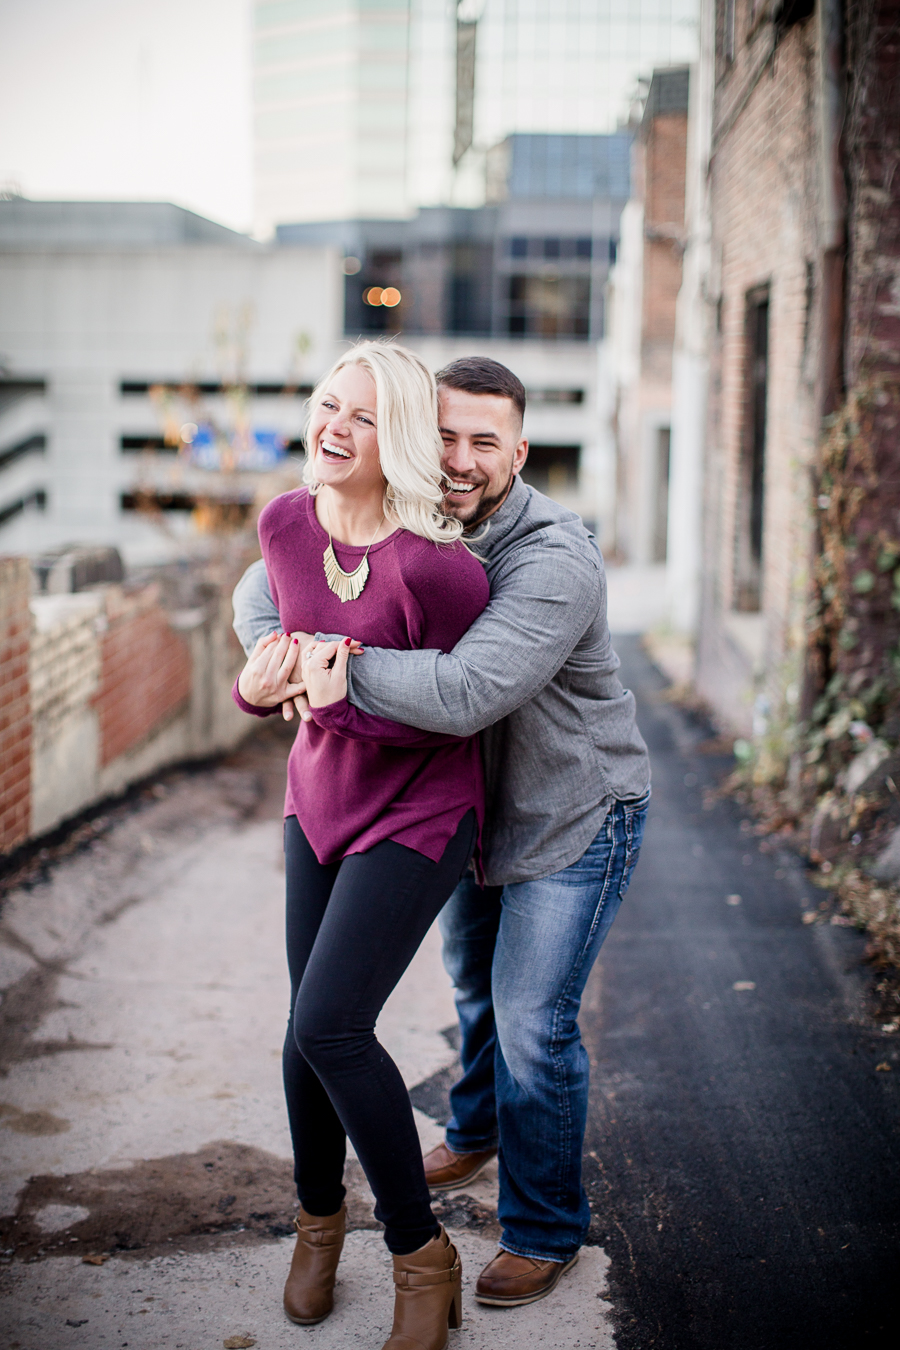 He scared her from behind engagement photo by Knoxville Wedding Photographer, Amanda May Photos.